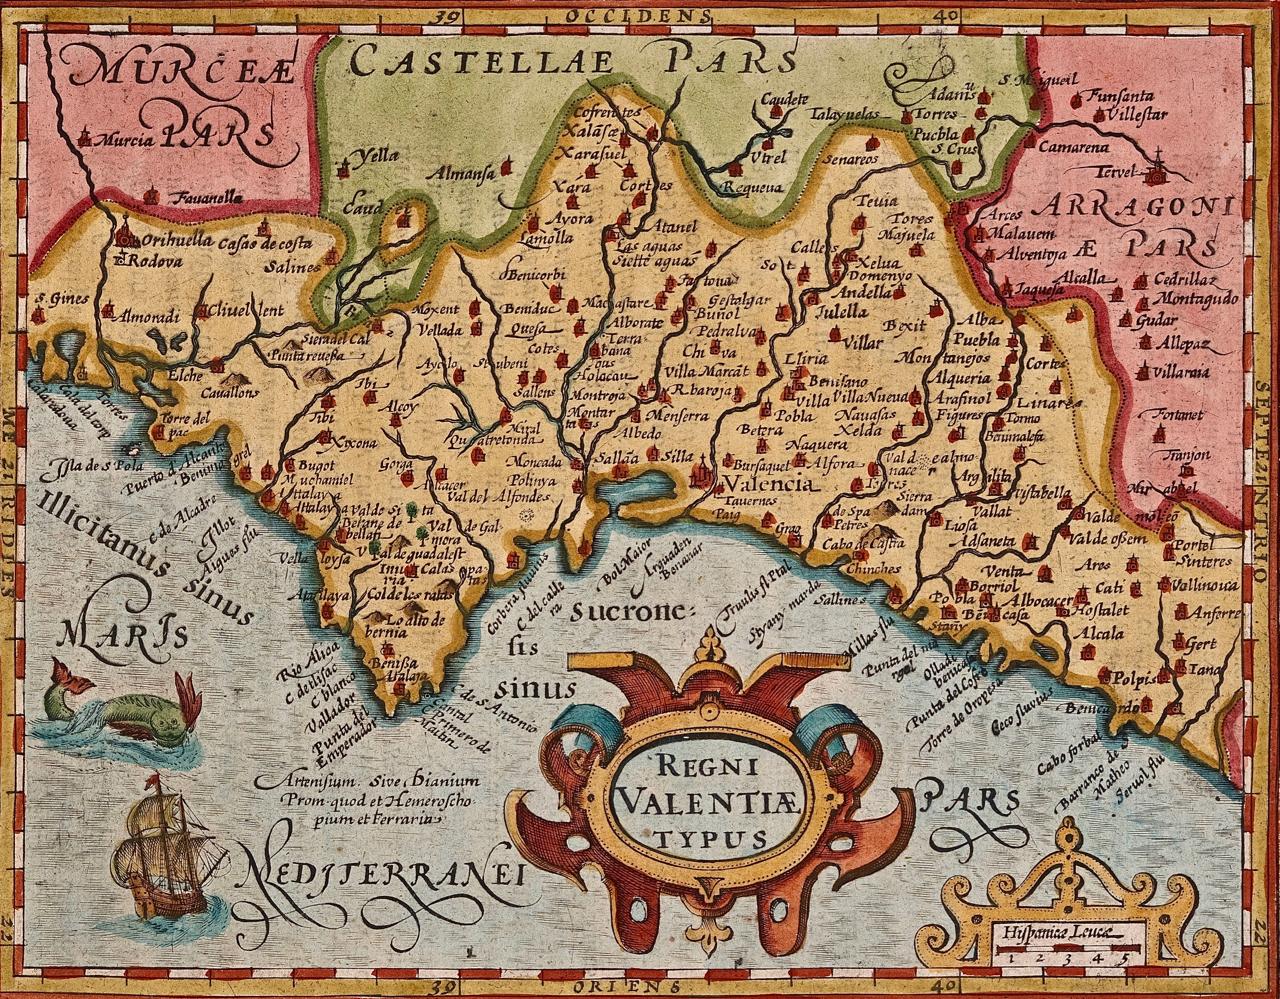 Valencia and Murcia, Spain: A 17th Century Hand-Colored Map by Mercator/Hondius - Print by Gerard Mercator